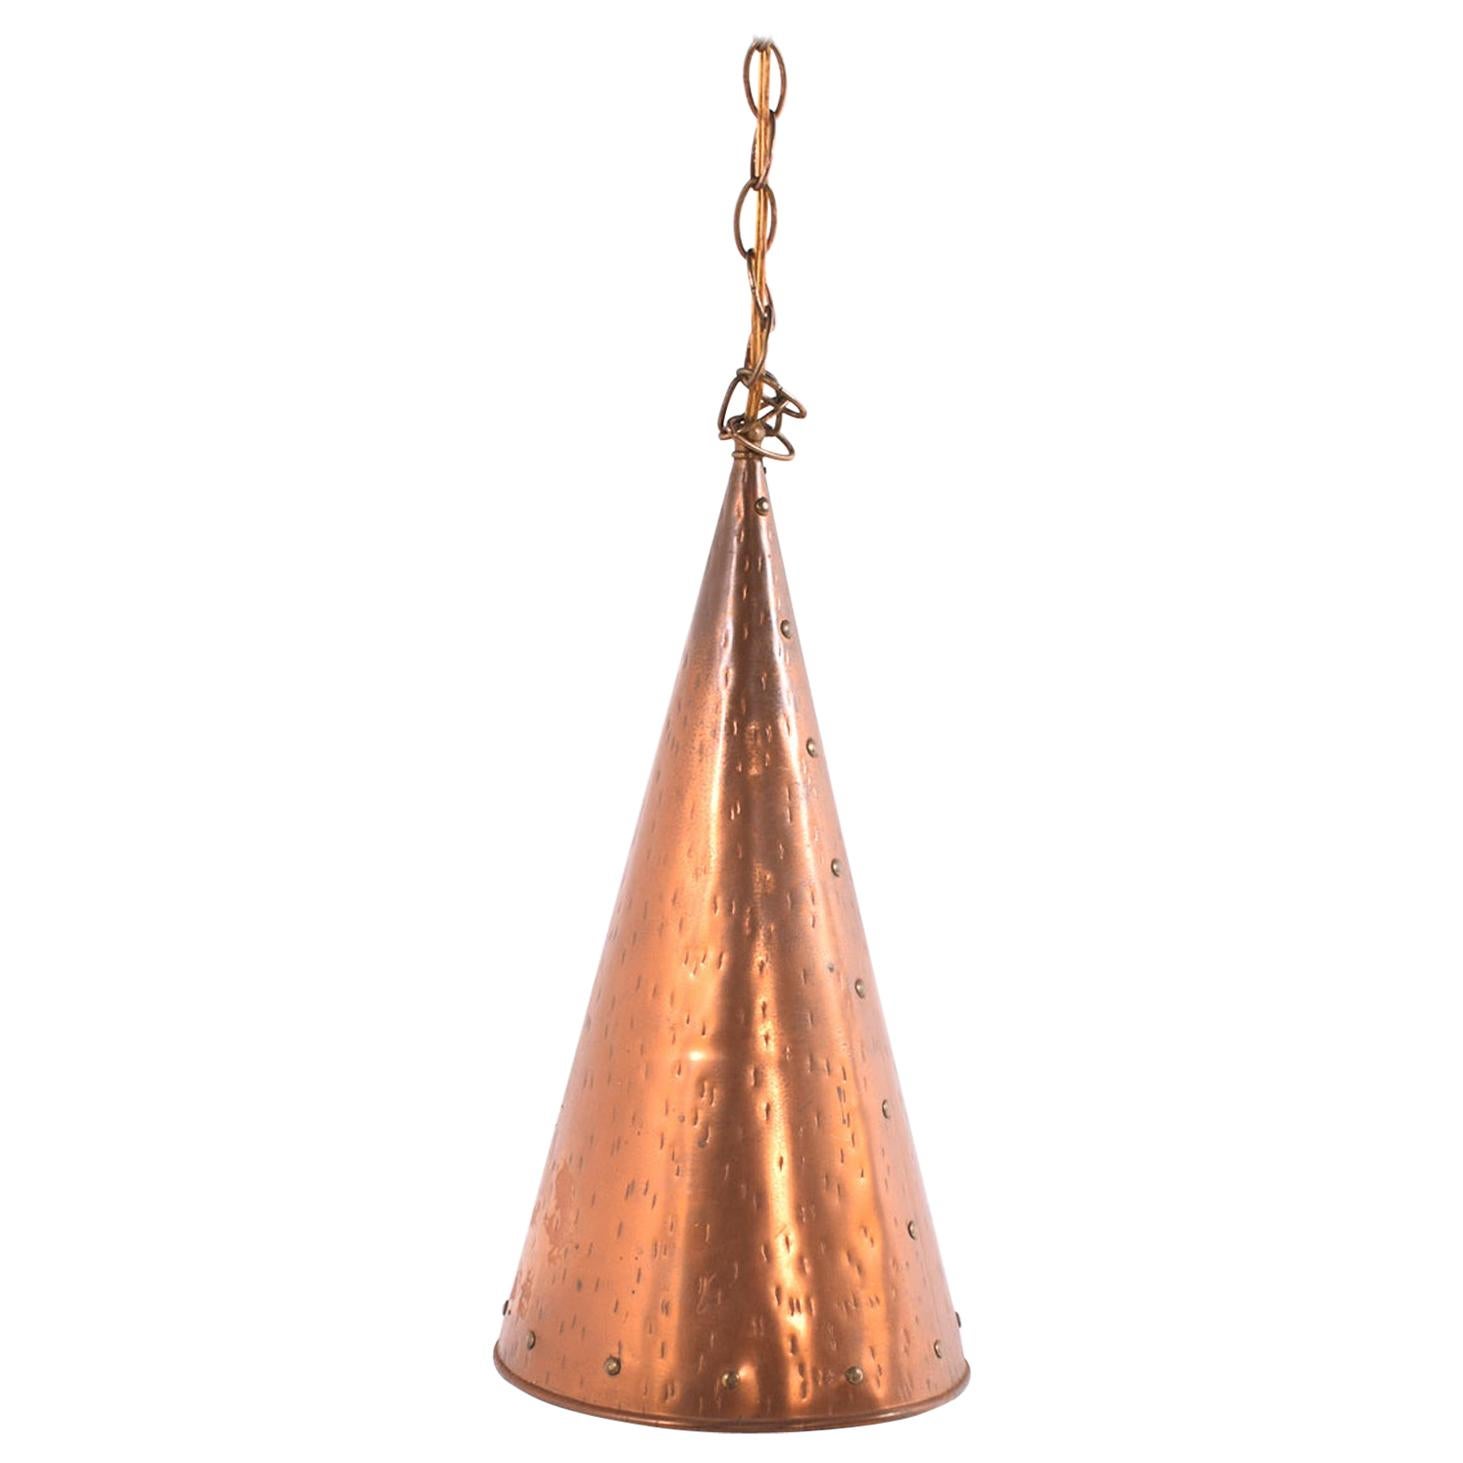 Danish Pendant Lamp in Hand-Hammered Copper by E.S Horn Aalestrup, 1950s For Sale